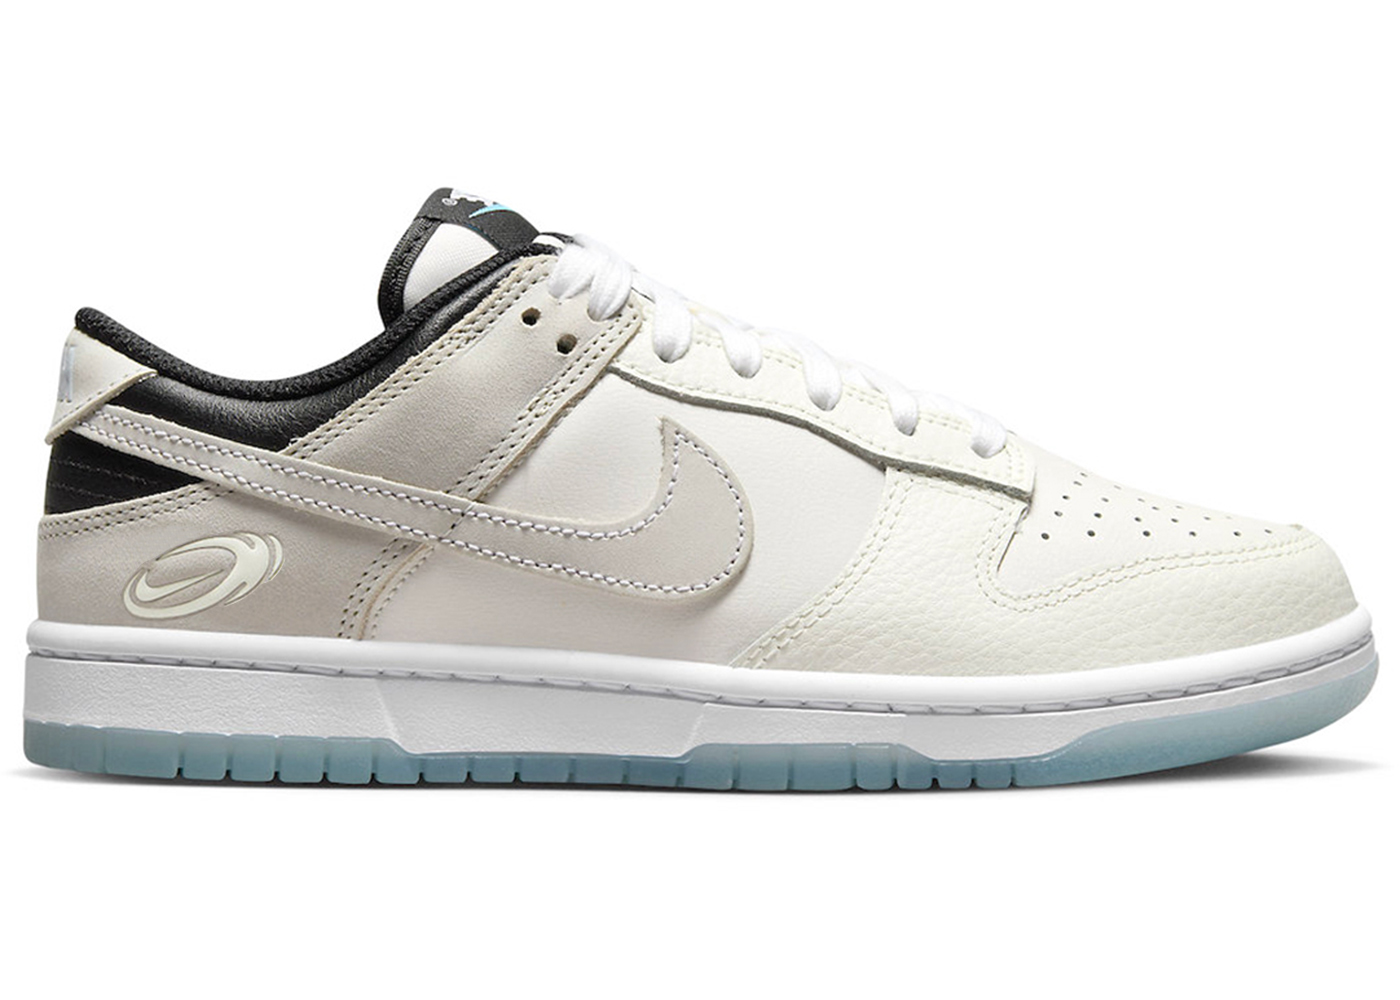 Nike Dunk Low Supersonic (Women's) - FN7646-030 - US